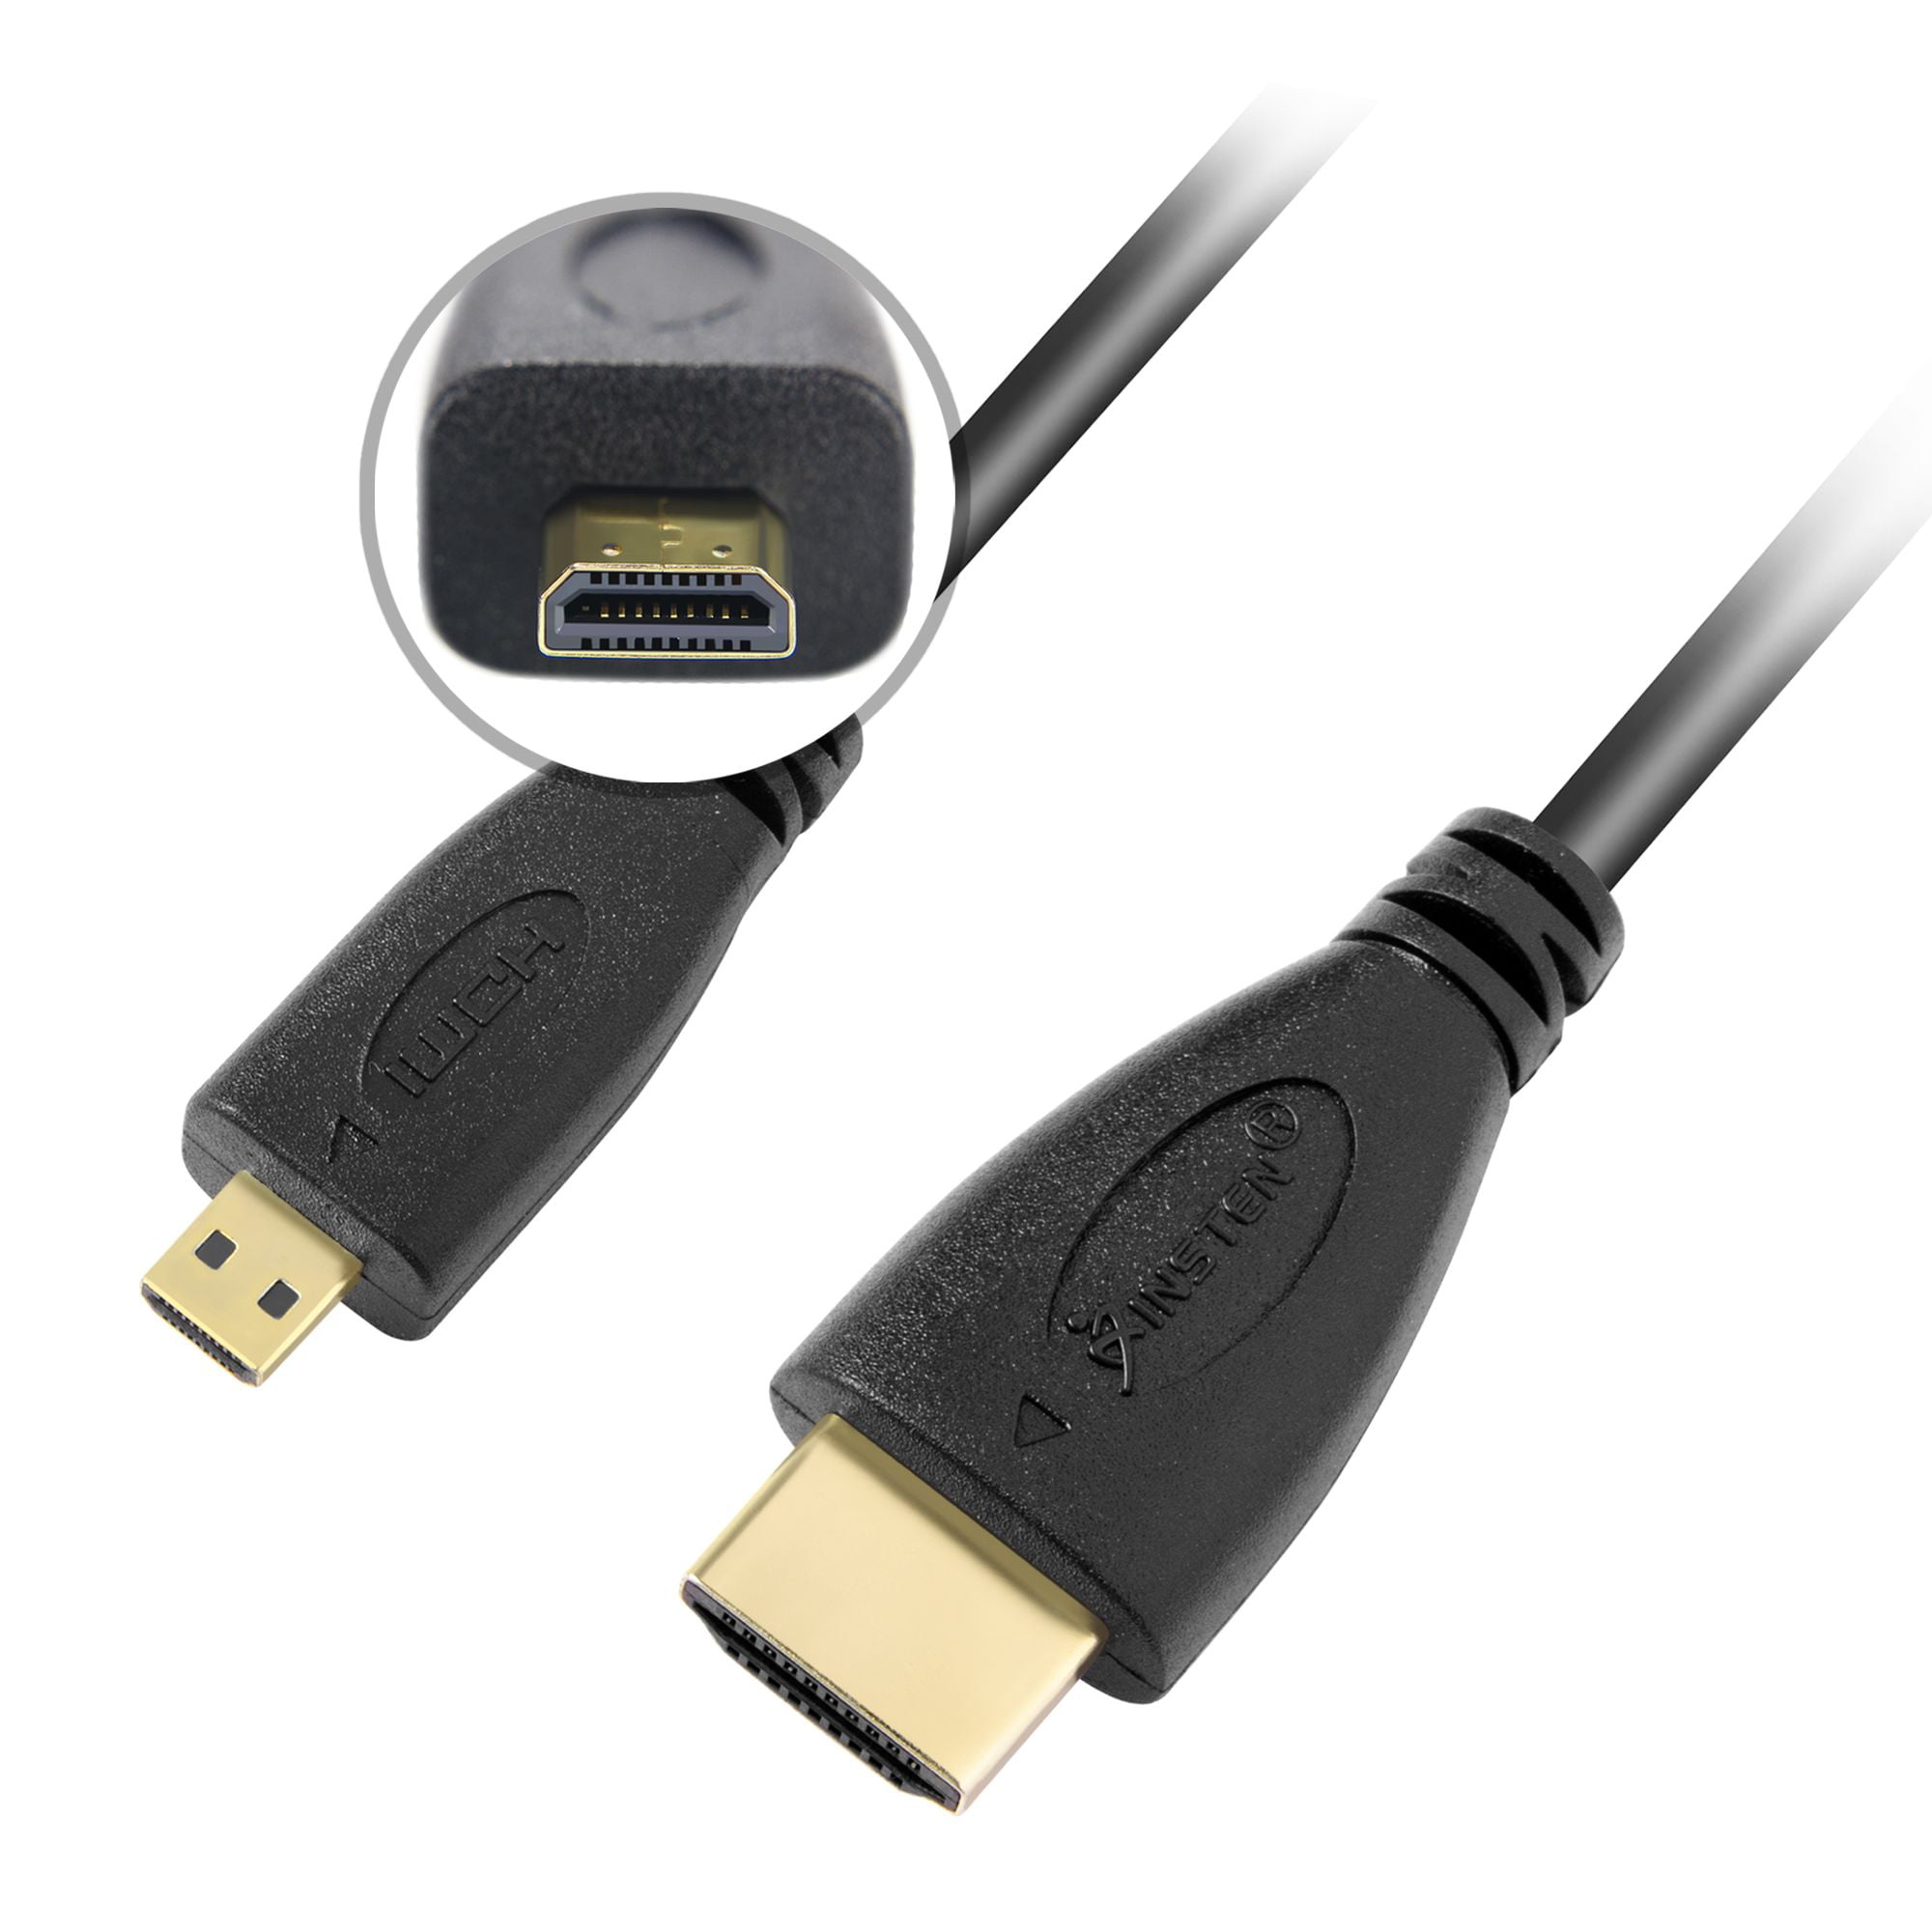 Micro hdmi Type D Male to hdmi Type A Female Adapter Connector For HDTV B$CA